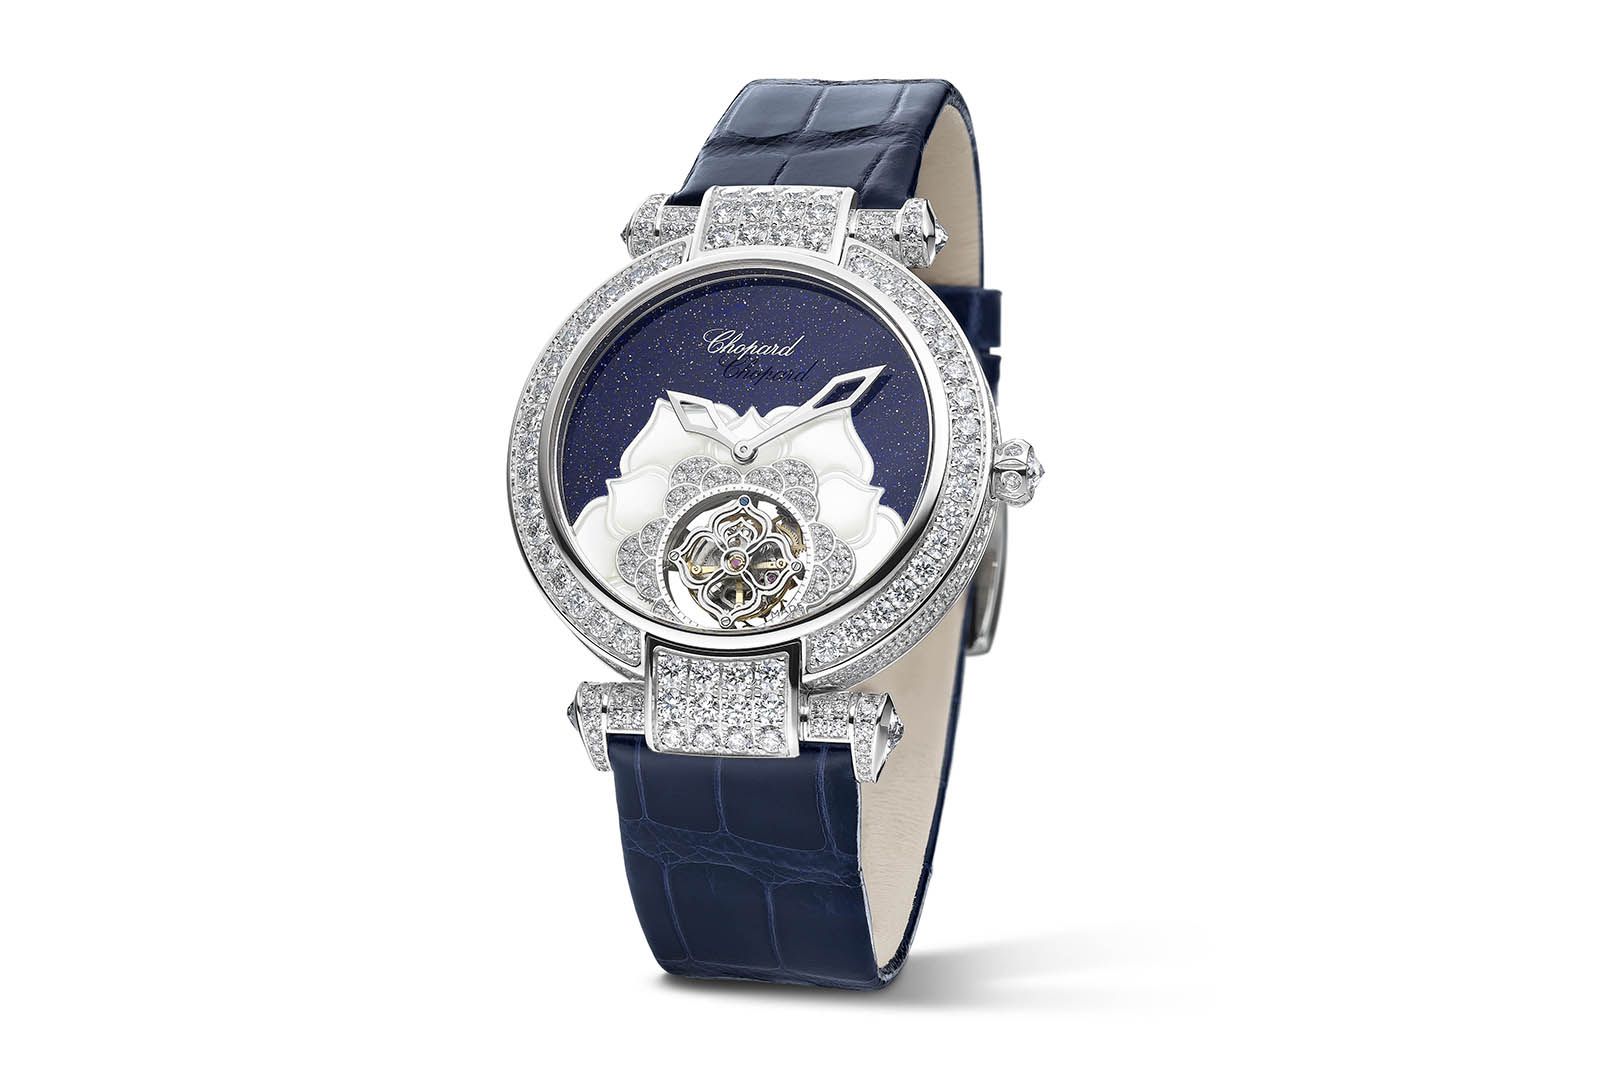 Watches & Wonders 2022: Focus on High Jewellery Watches